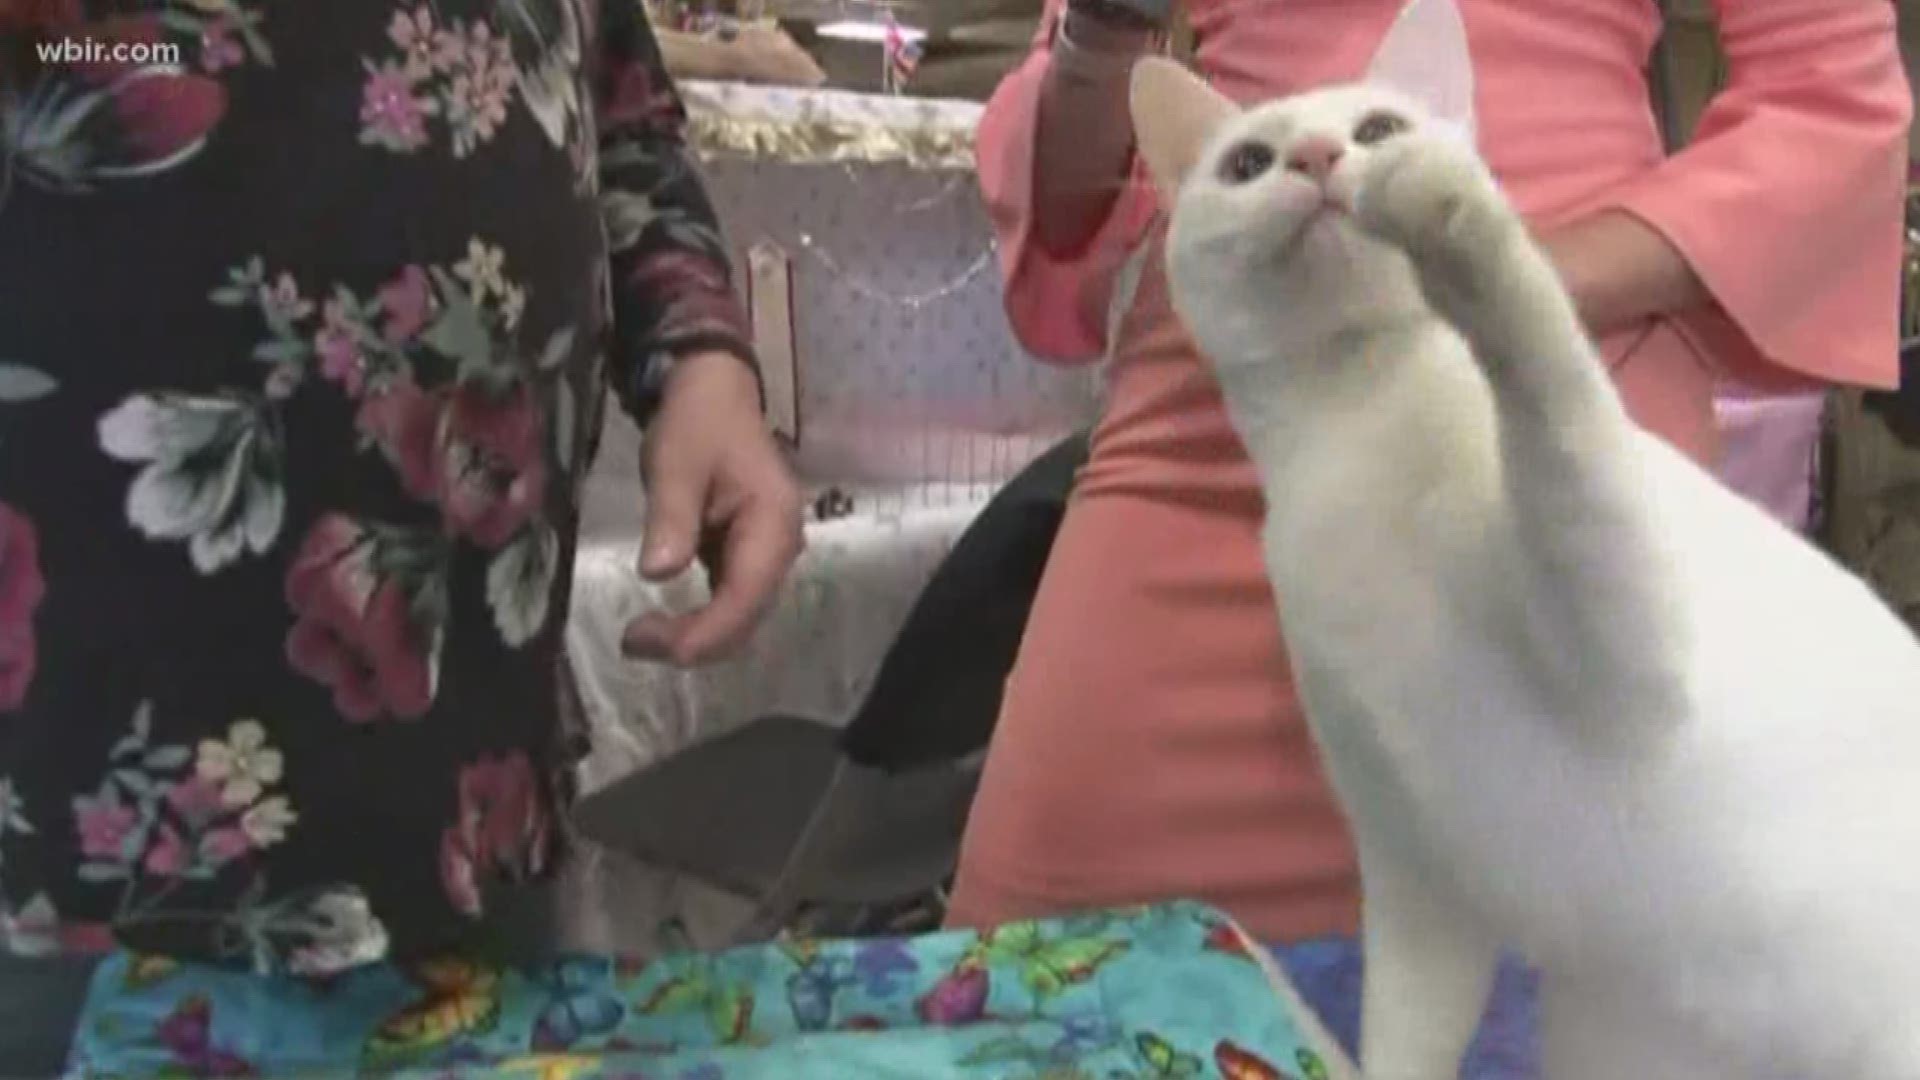 Over 200 cats and 40 different breeds were in Knoxville to strut their stuff.